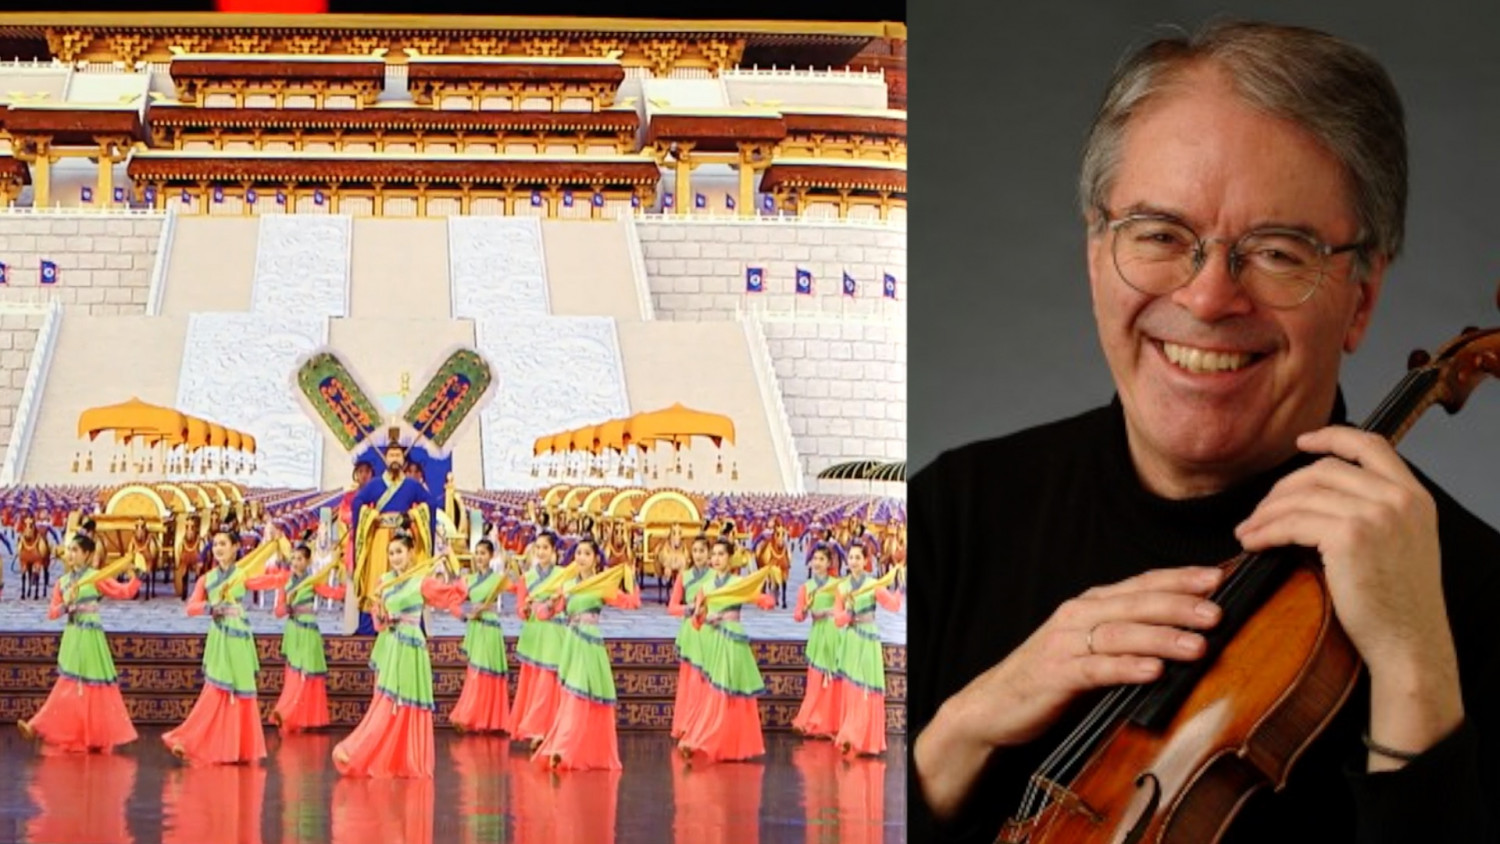 Renowned Violinist Enjoys Shen Yun’s Music, Dance, and Production